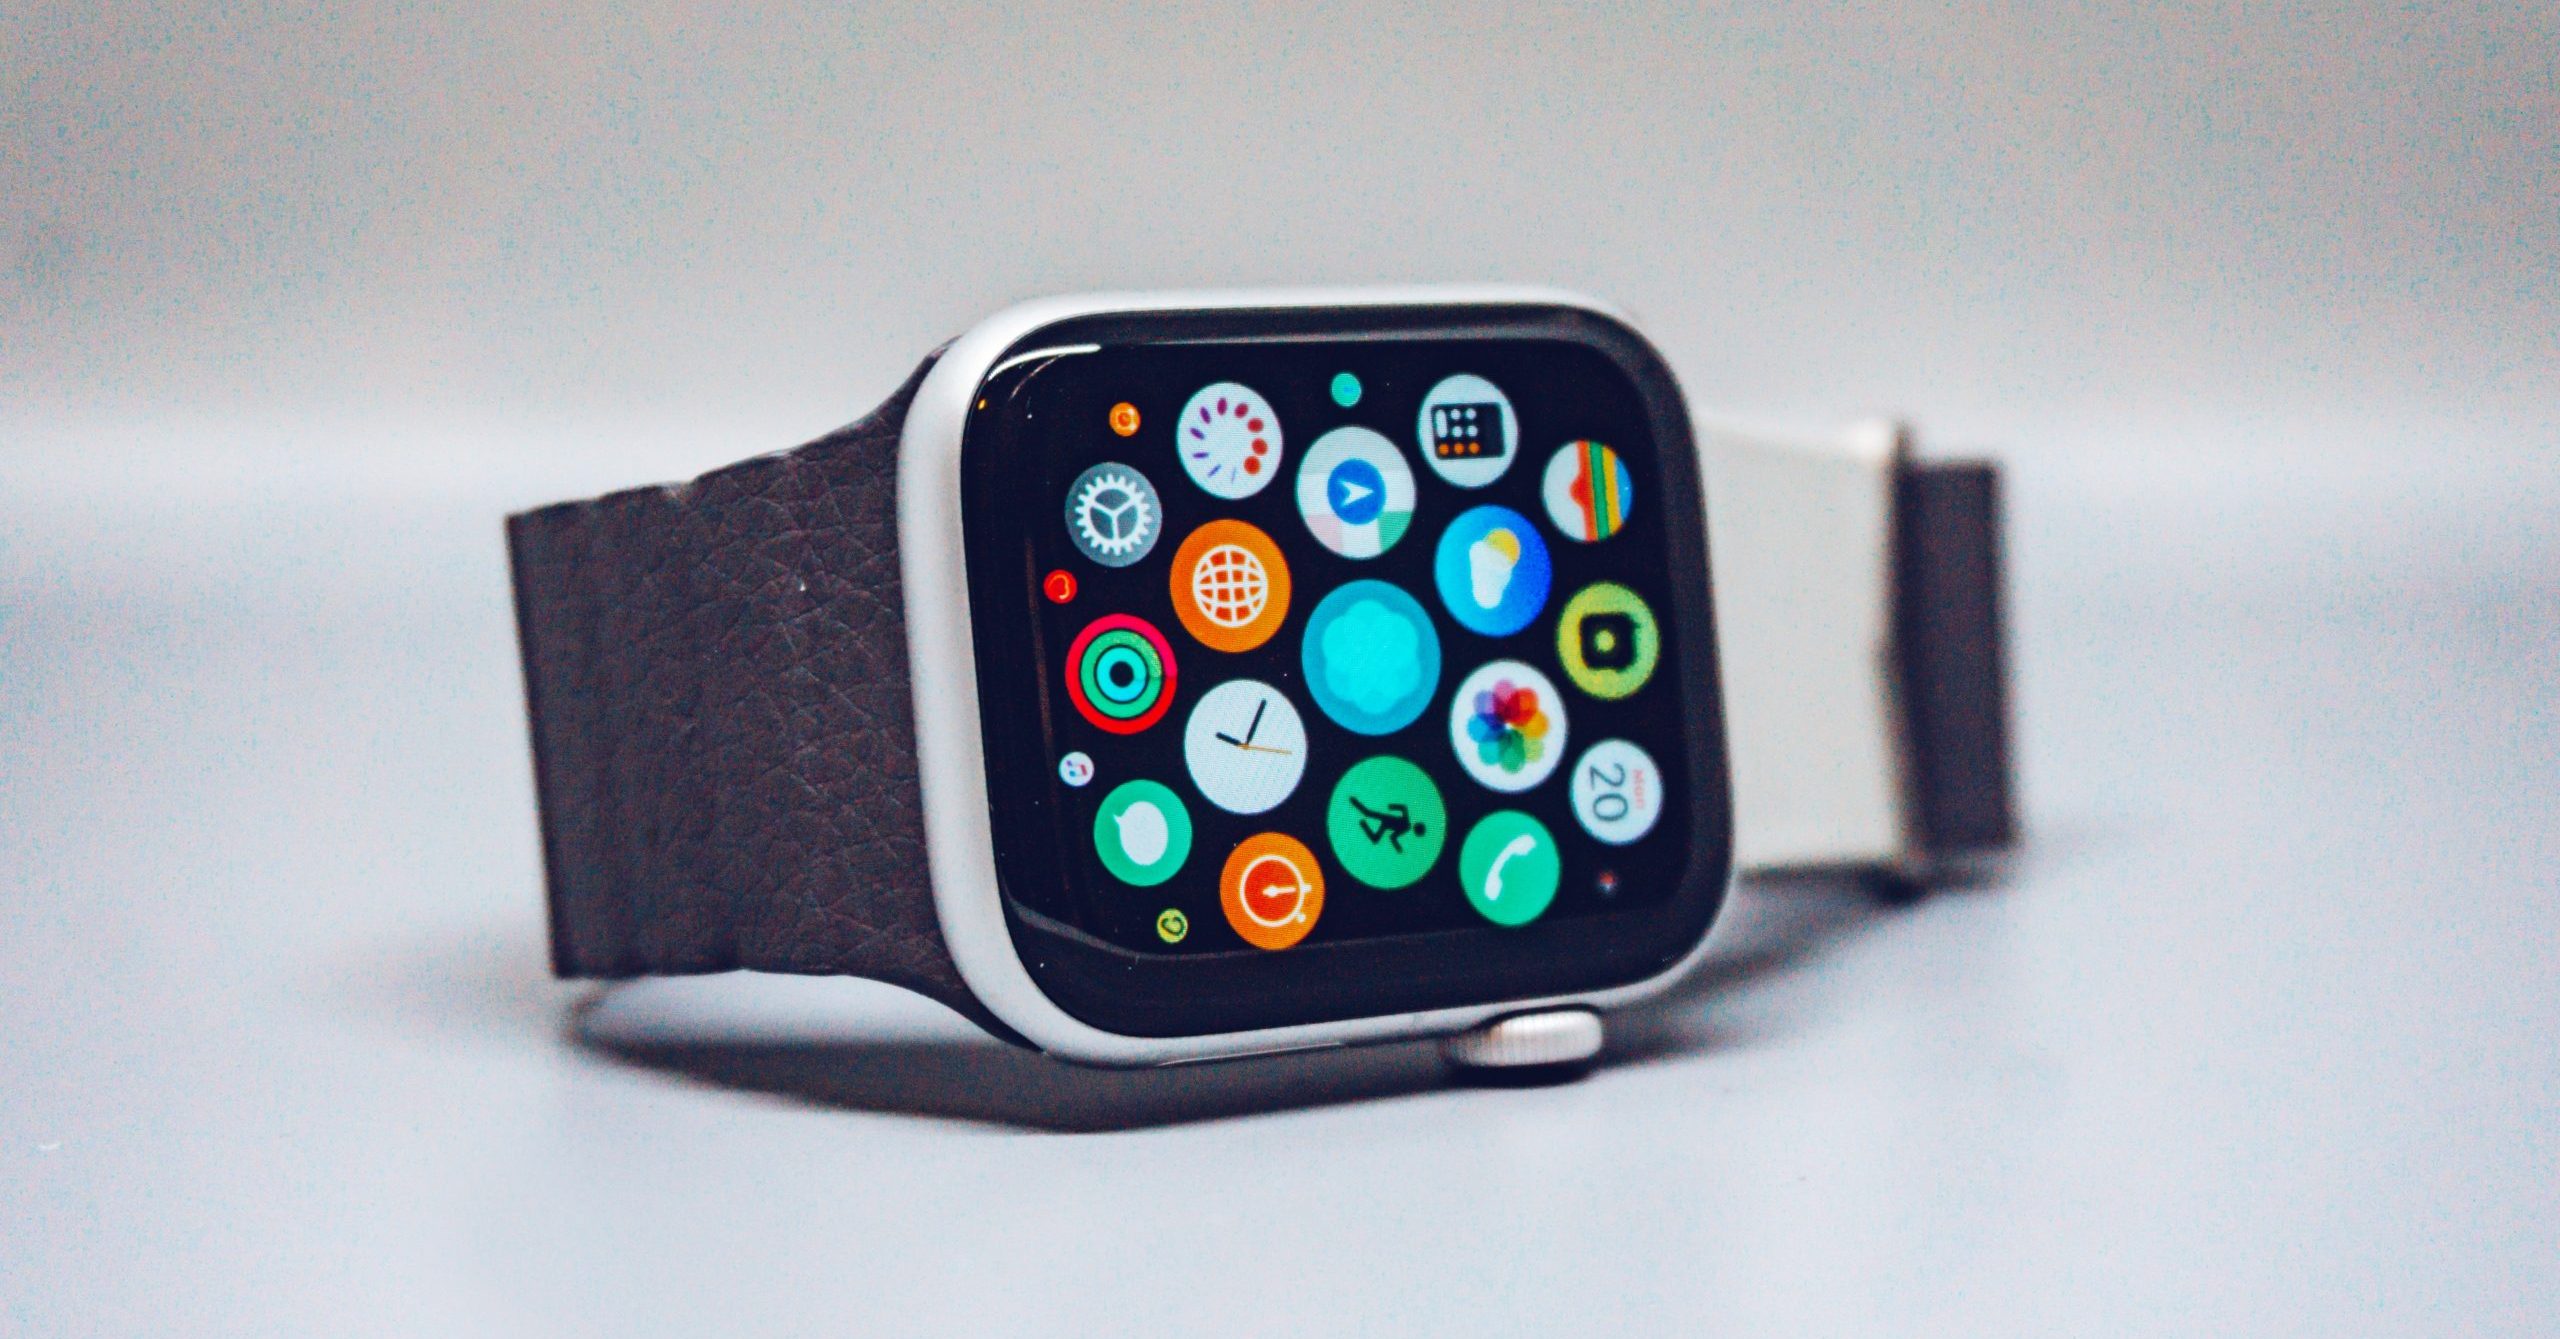 More Wearables Mean More Security Concerns